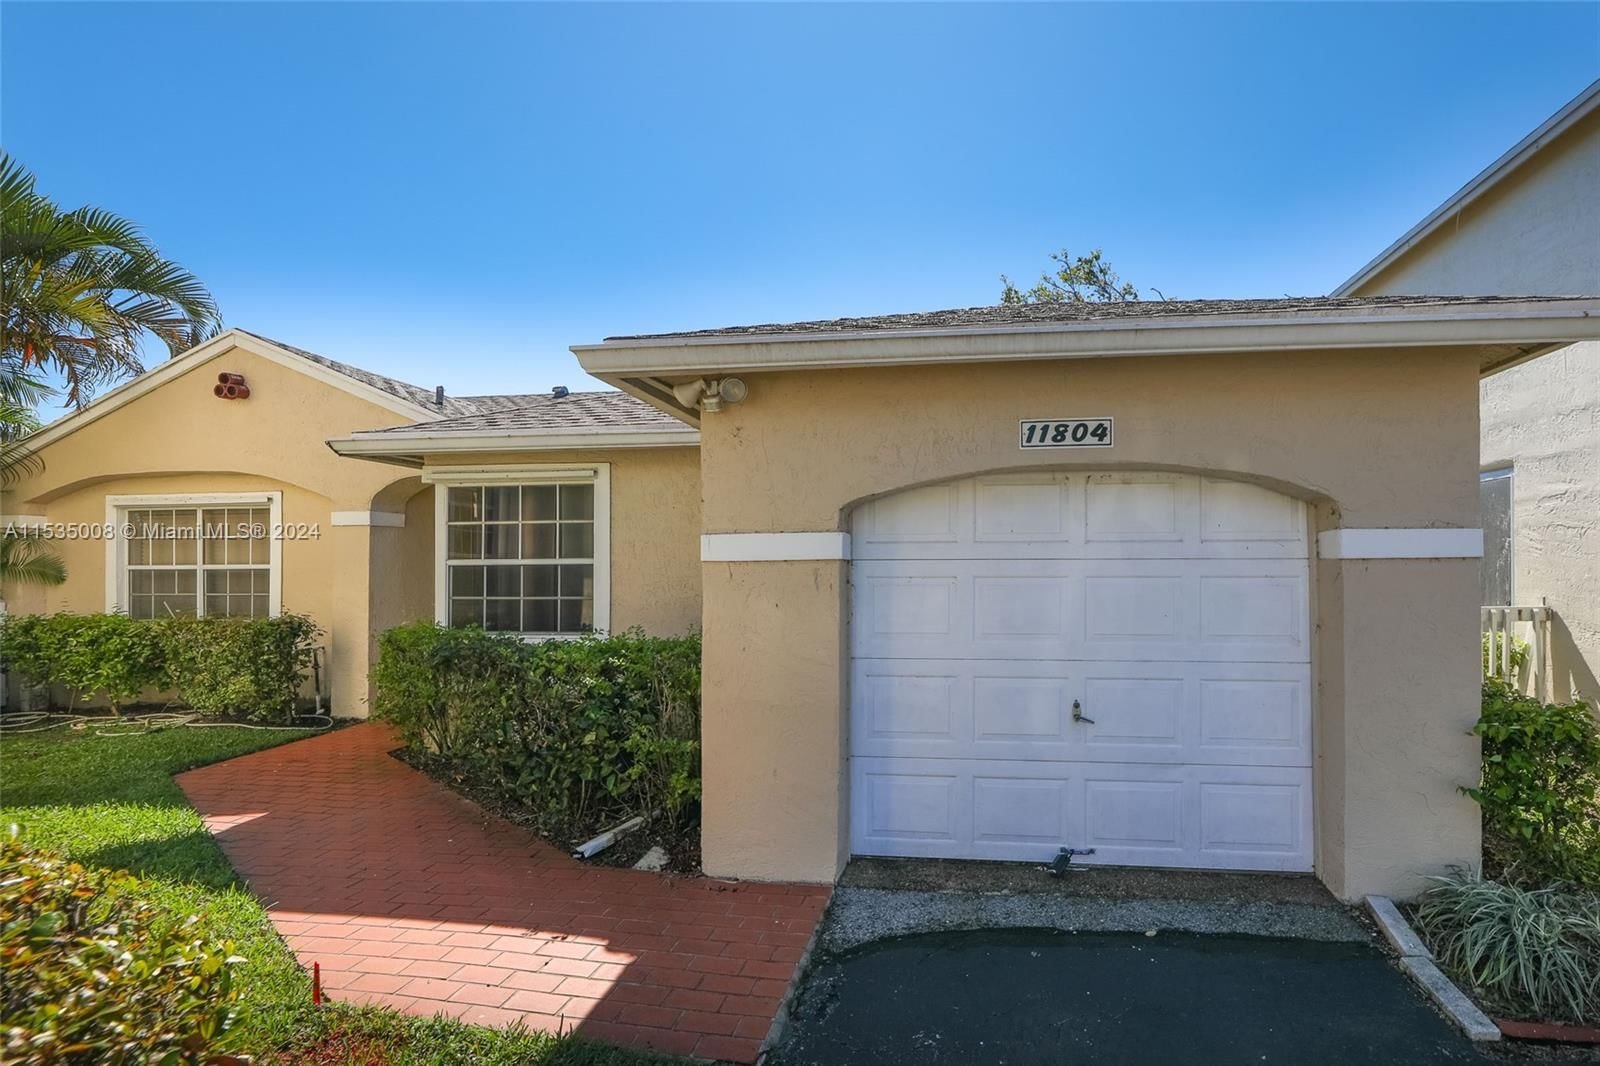 Real estate property located at 11804 13th St, Broward County, PEMBROKE LAKES SECTION EI, Pembroke Pines, FL